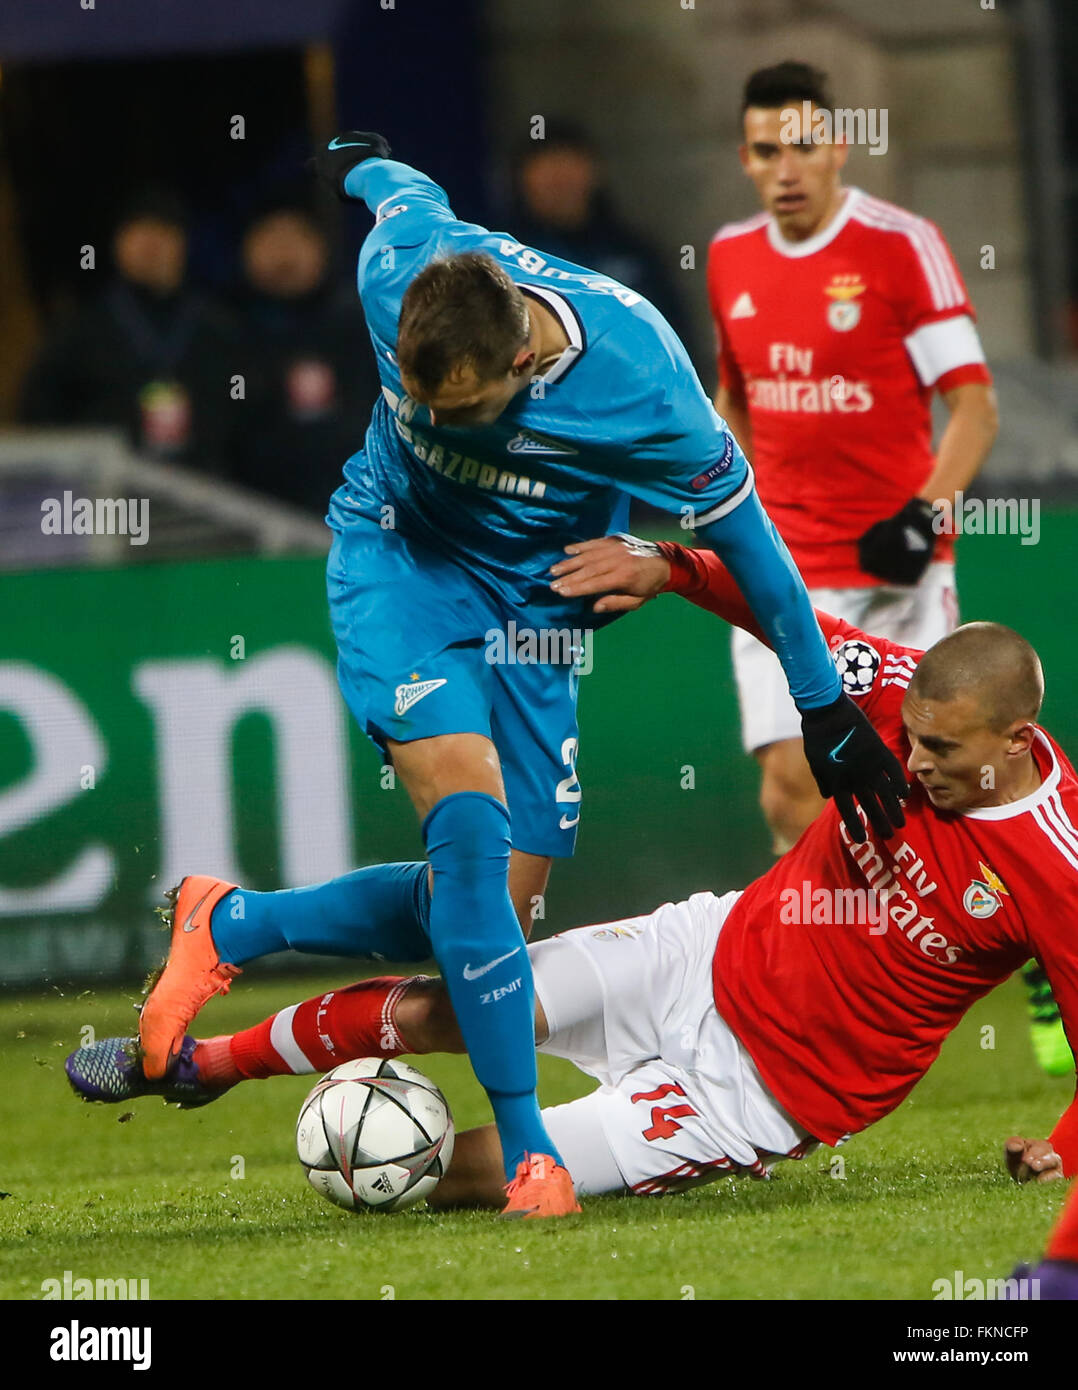 St. Petersburg, Russia. 9th March, 2016. Artem Dzyuba (L) of Zenit and Victor Lindelof of Benfica (N14) vie for the ball during the UEFA Champions League Round of 16 second leg match between FC Zenit St. Petersburg and SL Benfica at Petrovsky stadium. Credit:  Mike Kireev/Alamy Live News Stock Photo